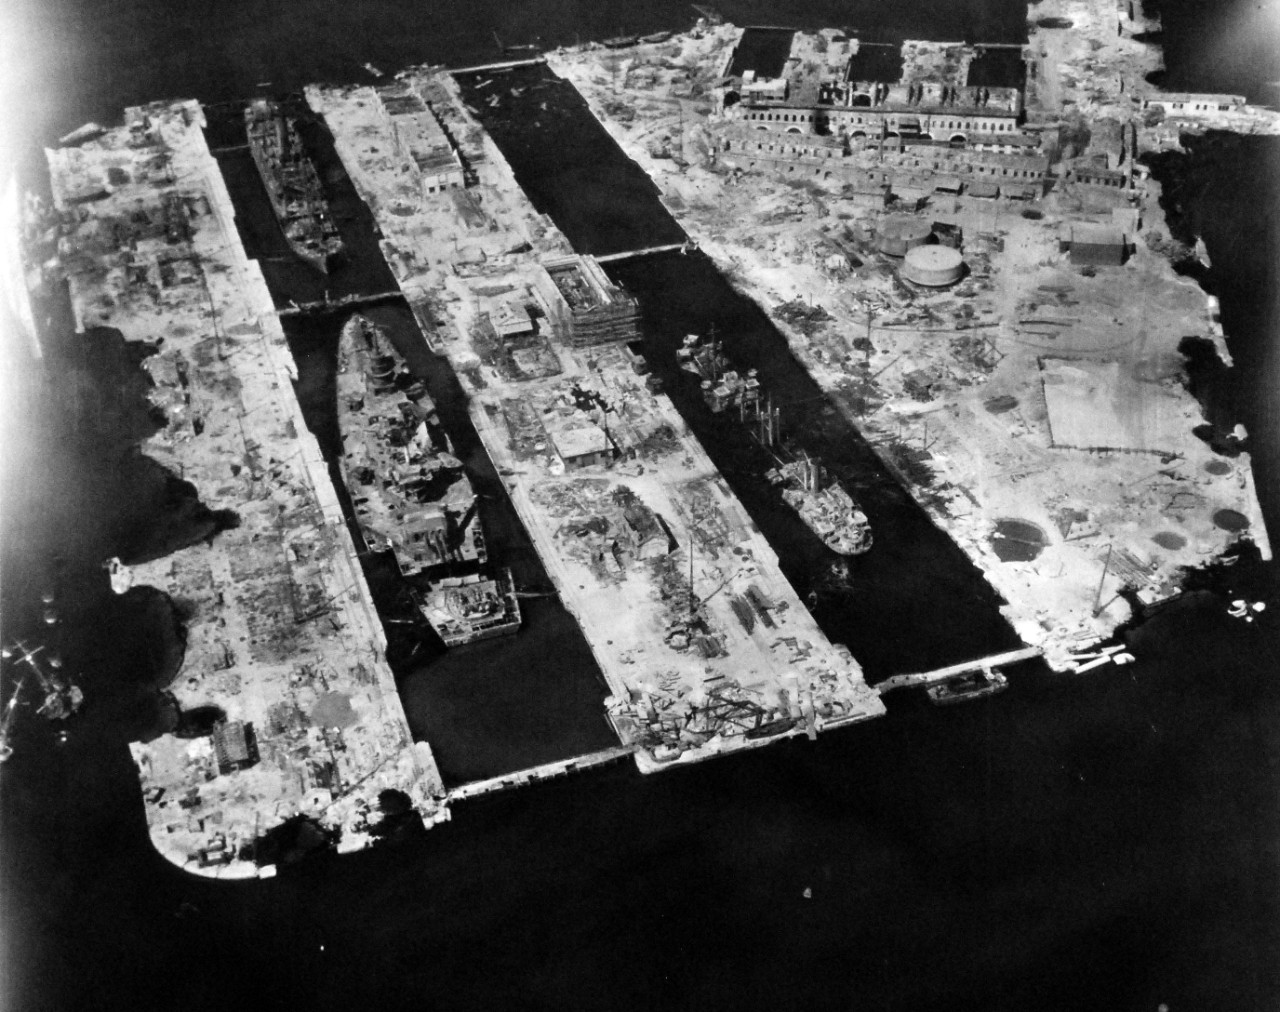 80-G-364000:  Invasion of Southern France, Toulon, August 1944.   Aerial view of the destruction to the harbor and installations at Toulon, France.  Taken by crew of USS Catoctin   (AGC 5).  Photograph received on 2 April 1946.   Official U.S. Navy Photograph, now in the collections of the National Archives.  (2014/7/10).